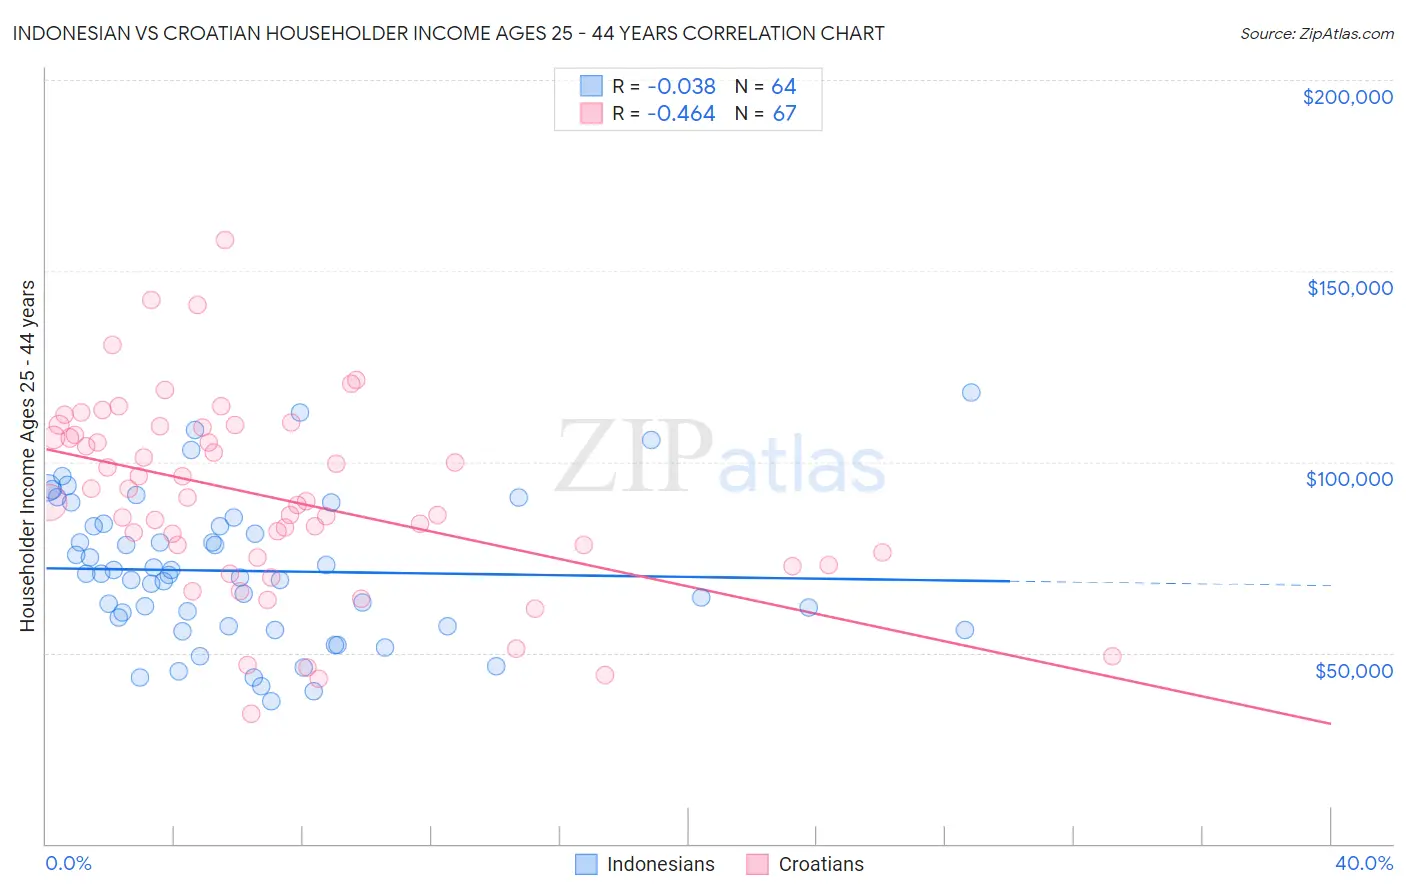 Indonesian vs Croatian Householder Income Ages 25 - 44 years